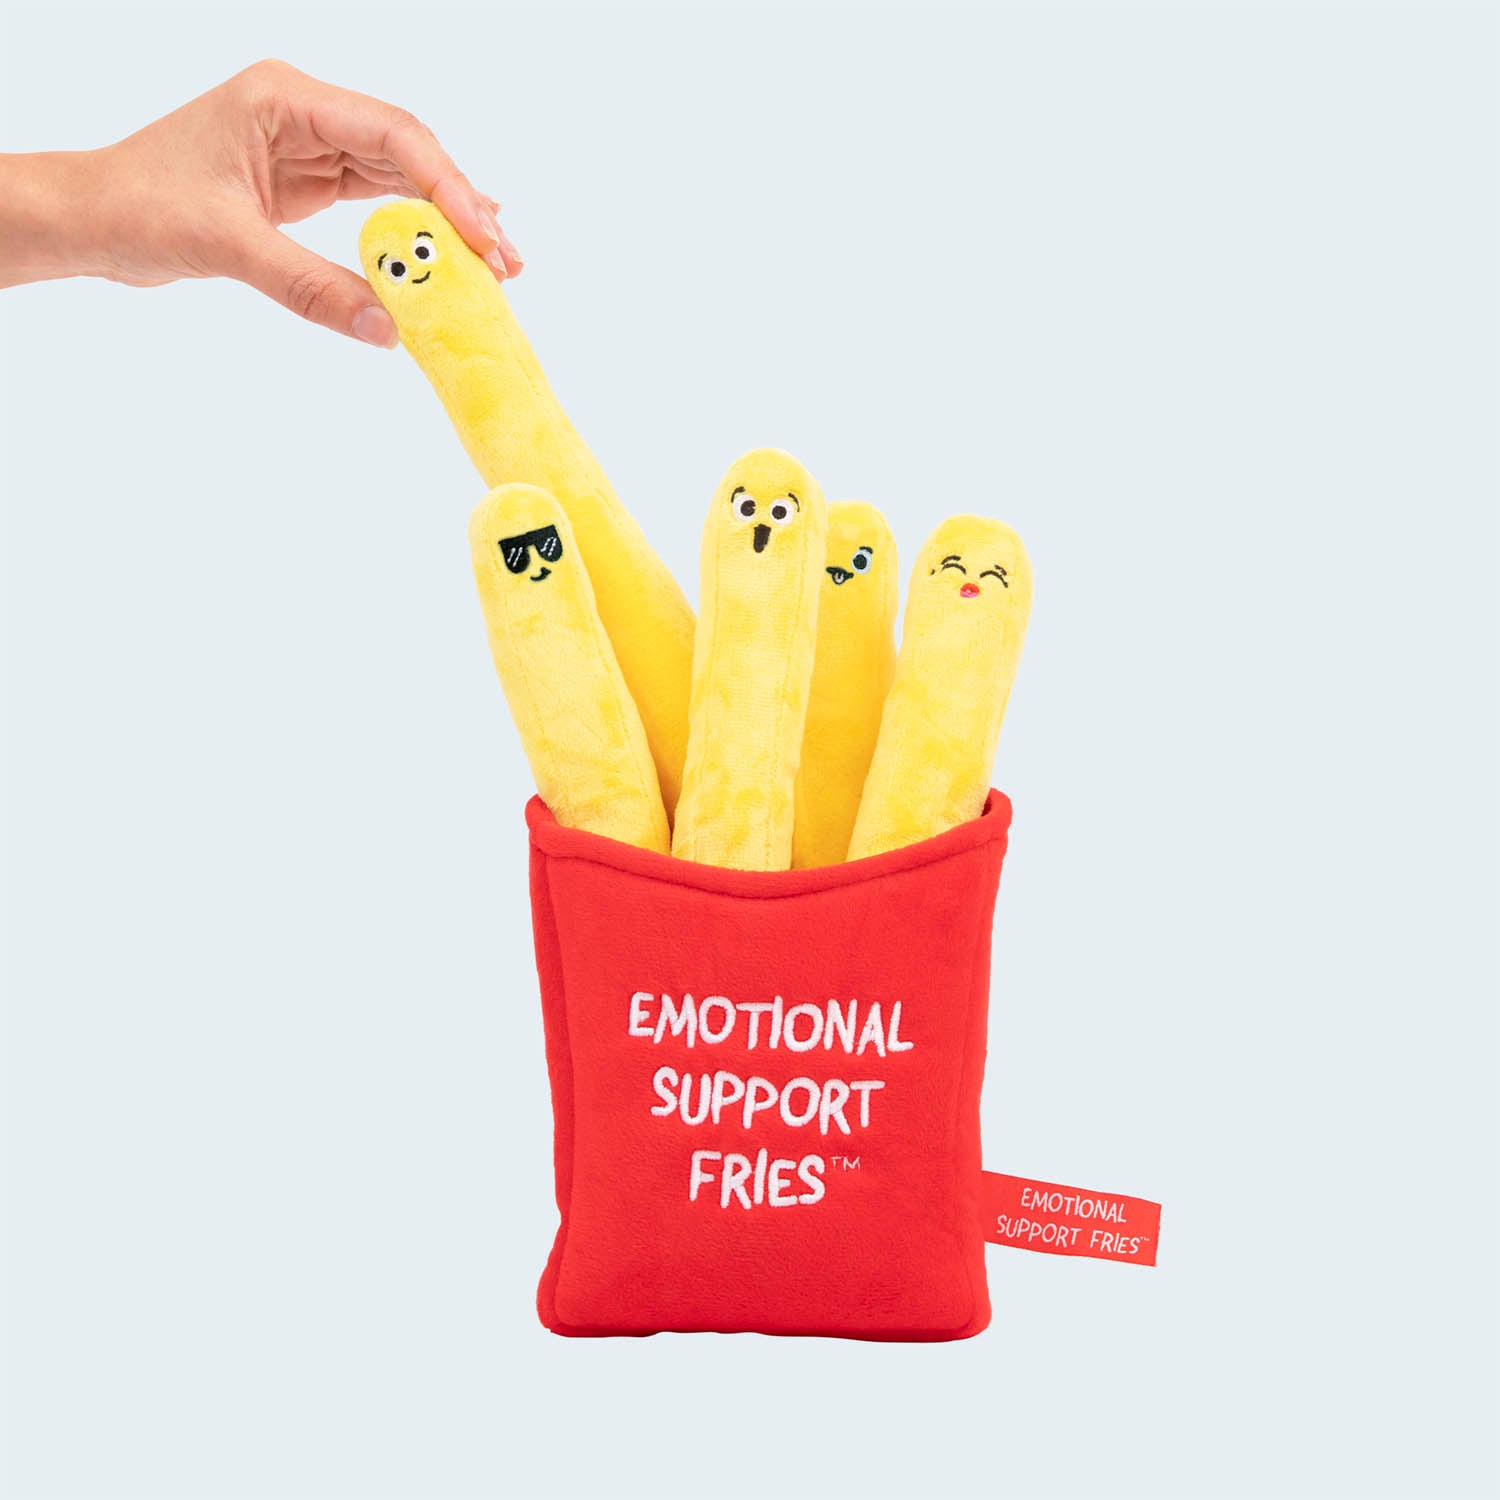 My Emotional Support French Fries Keep Me Happy 🥰🍟 @WhatDoYouMeme #shorts  